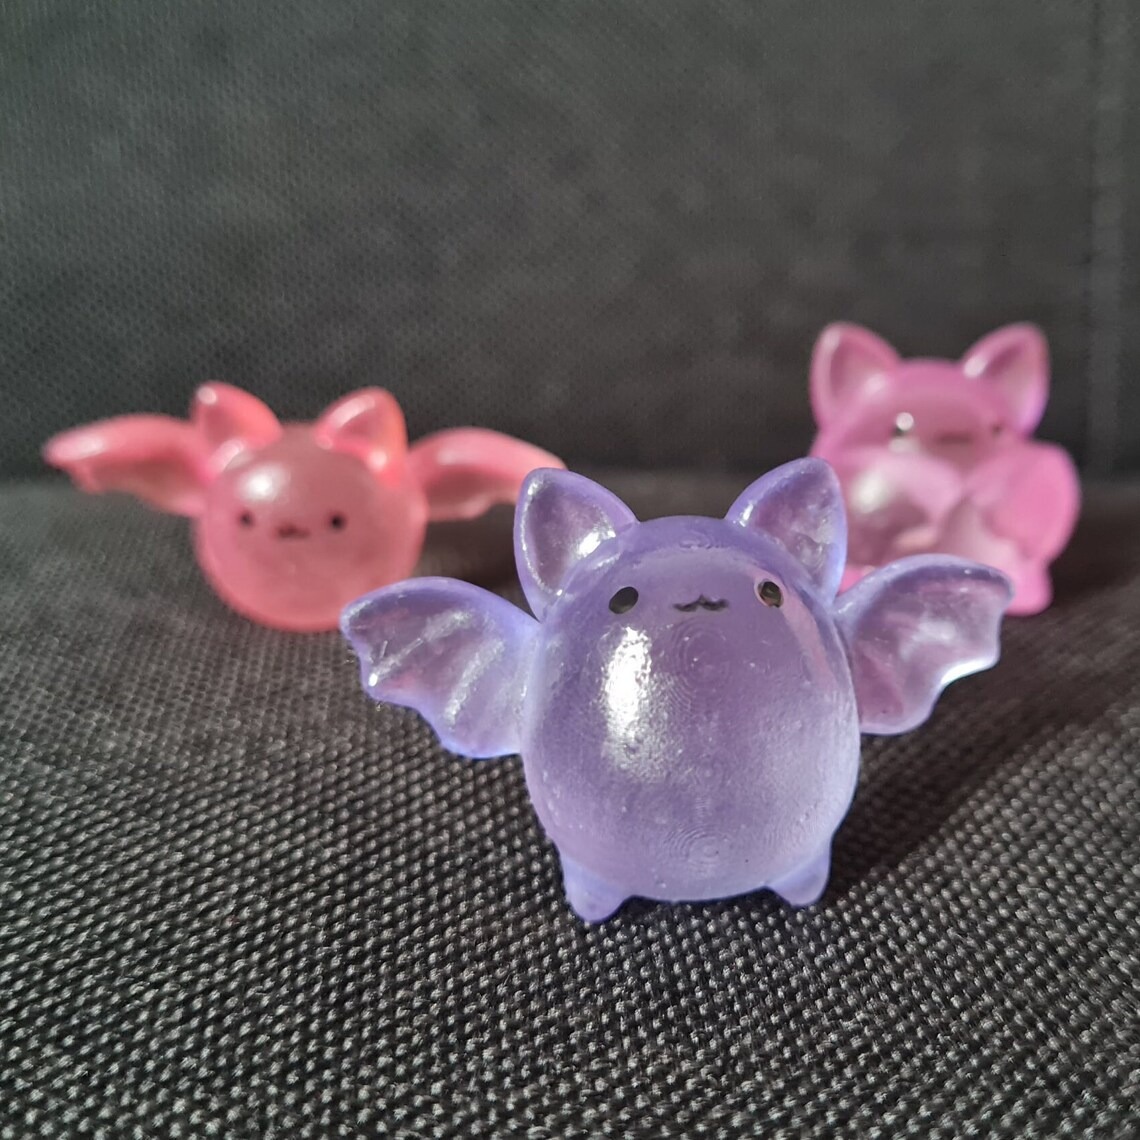 Liddle Lads, Cute Little Blob Like 3d Printed Resin Creatures By Ni (9)